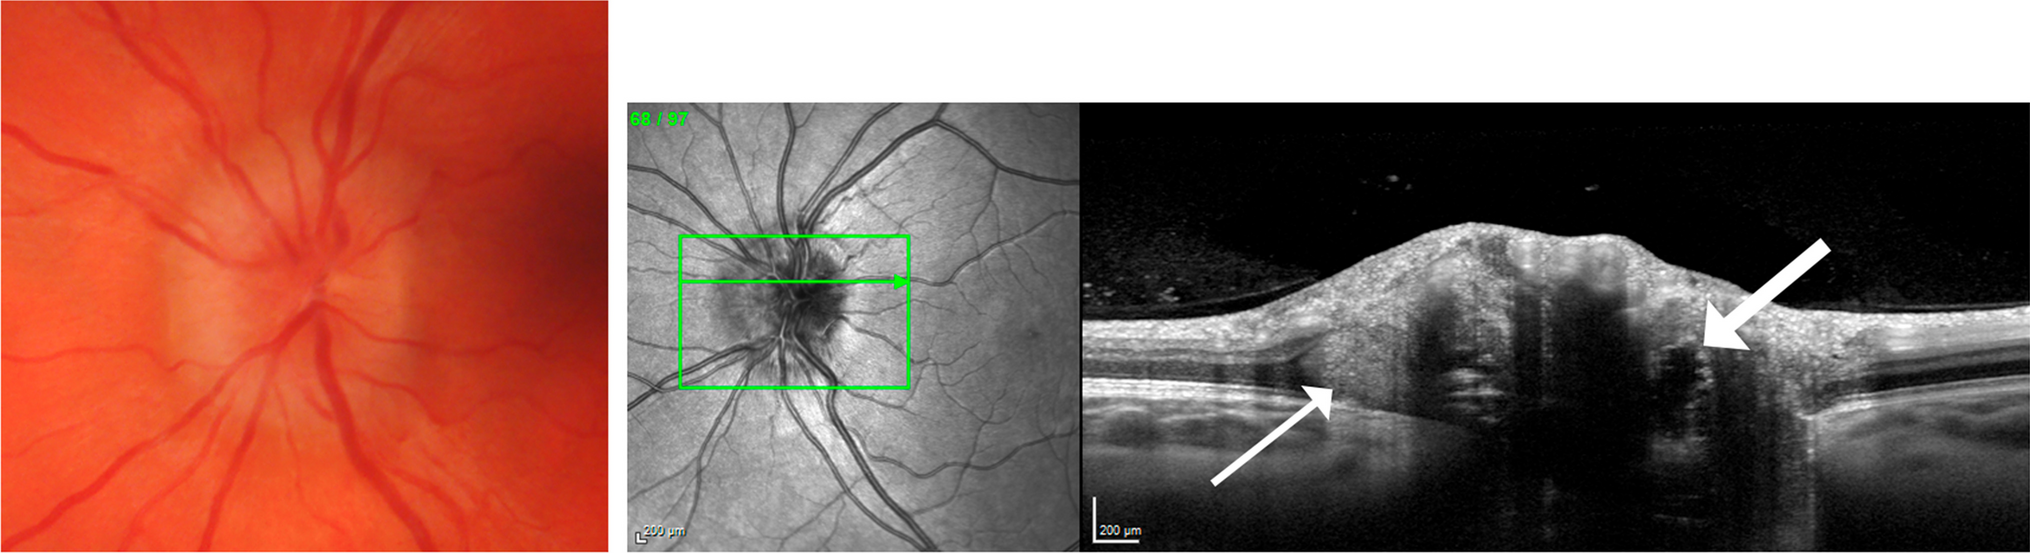 Advantages and Pitfalls of the Use of Optical Coherence Tomography for Papilledema